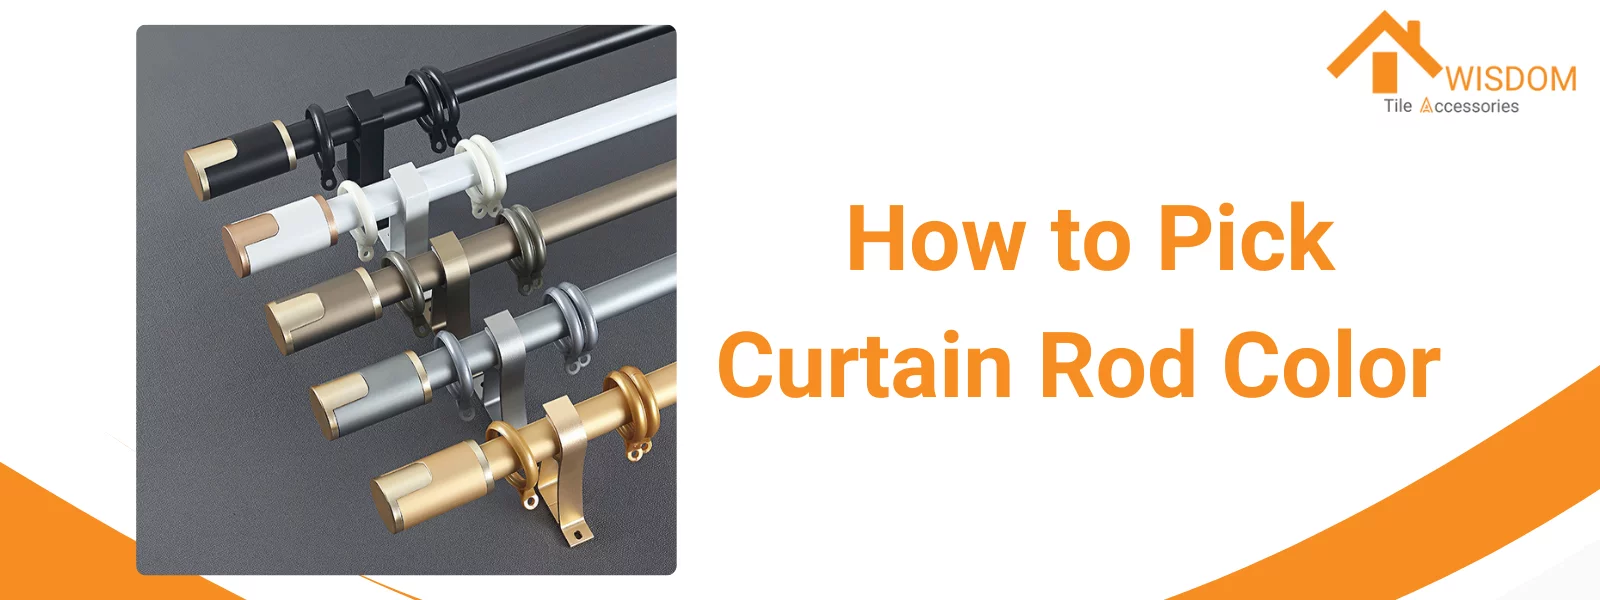 How to Pick Curtain Rod Color